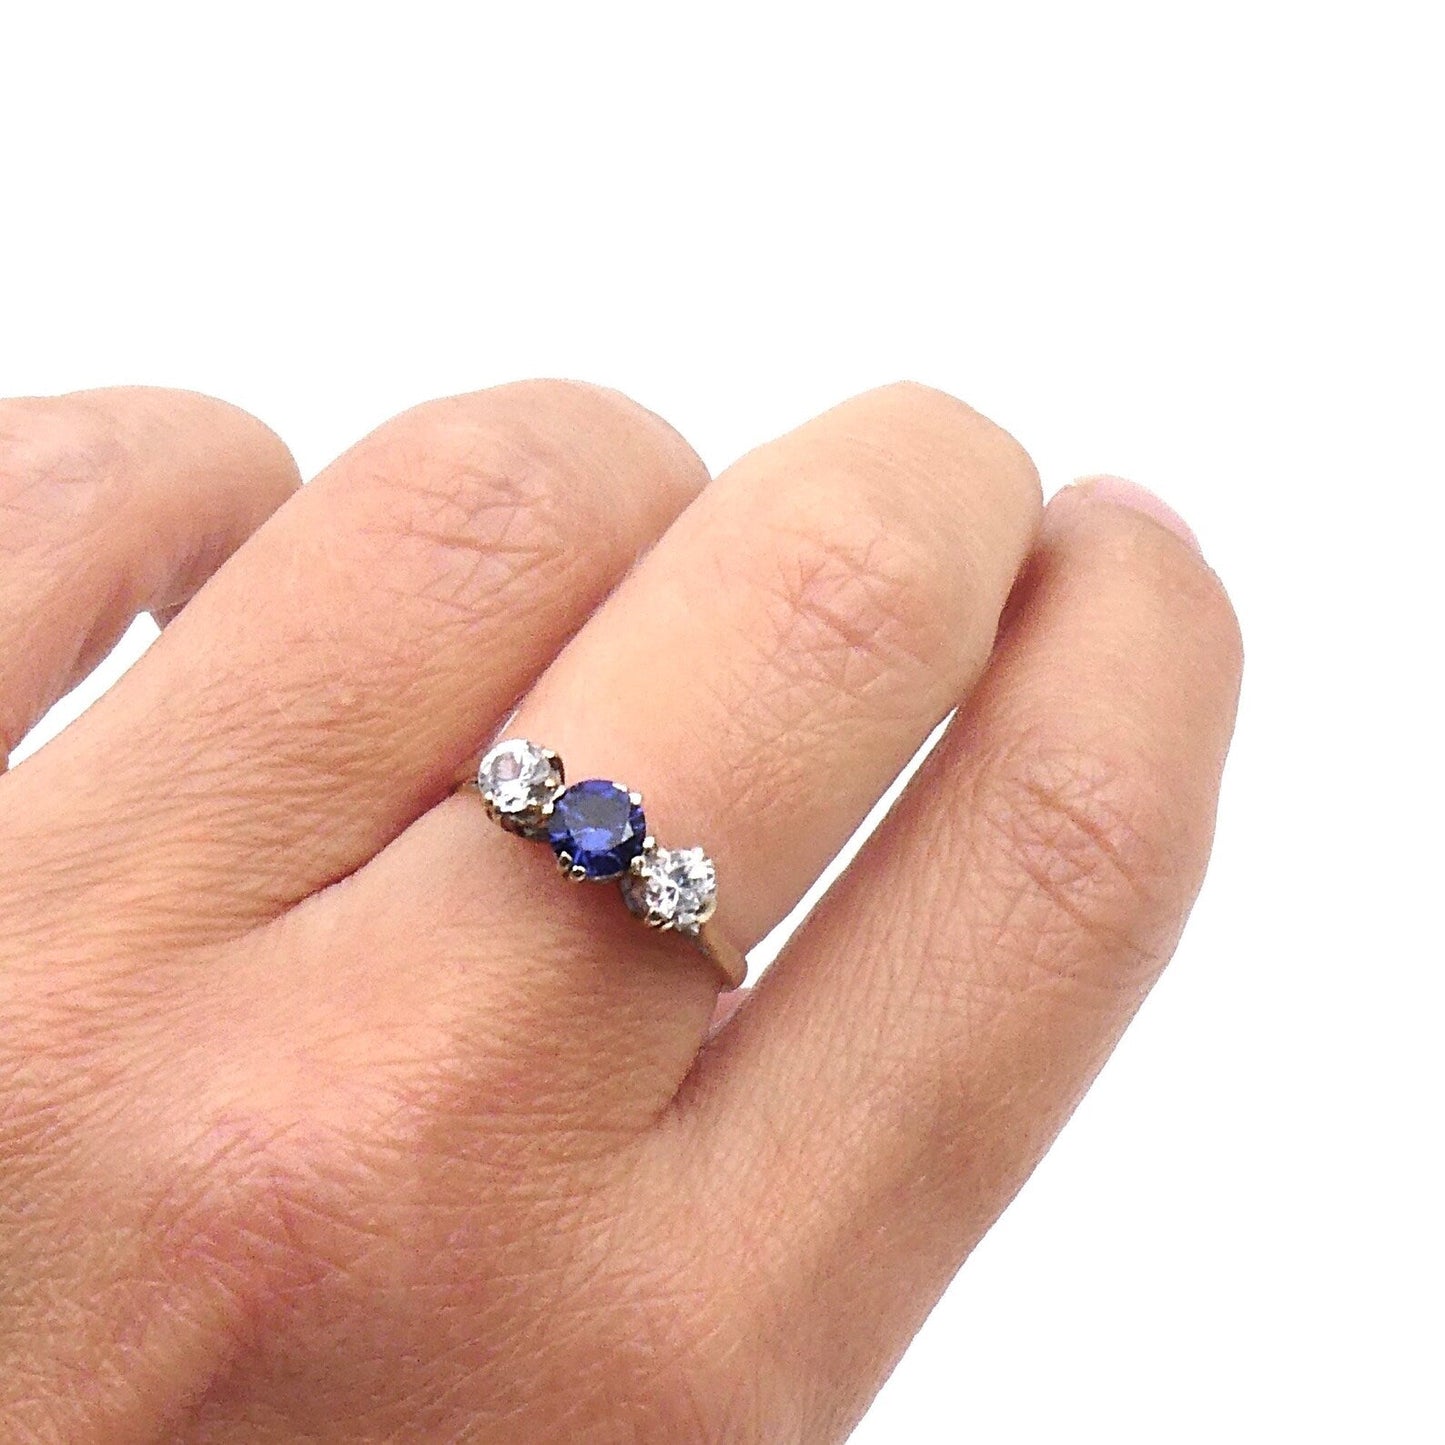 Vintage sapphire ring, three stone ring with a vibrant blue sapphire and quartz. - Collected